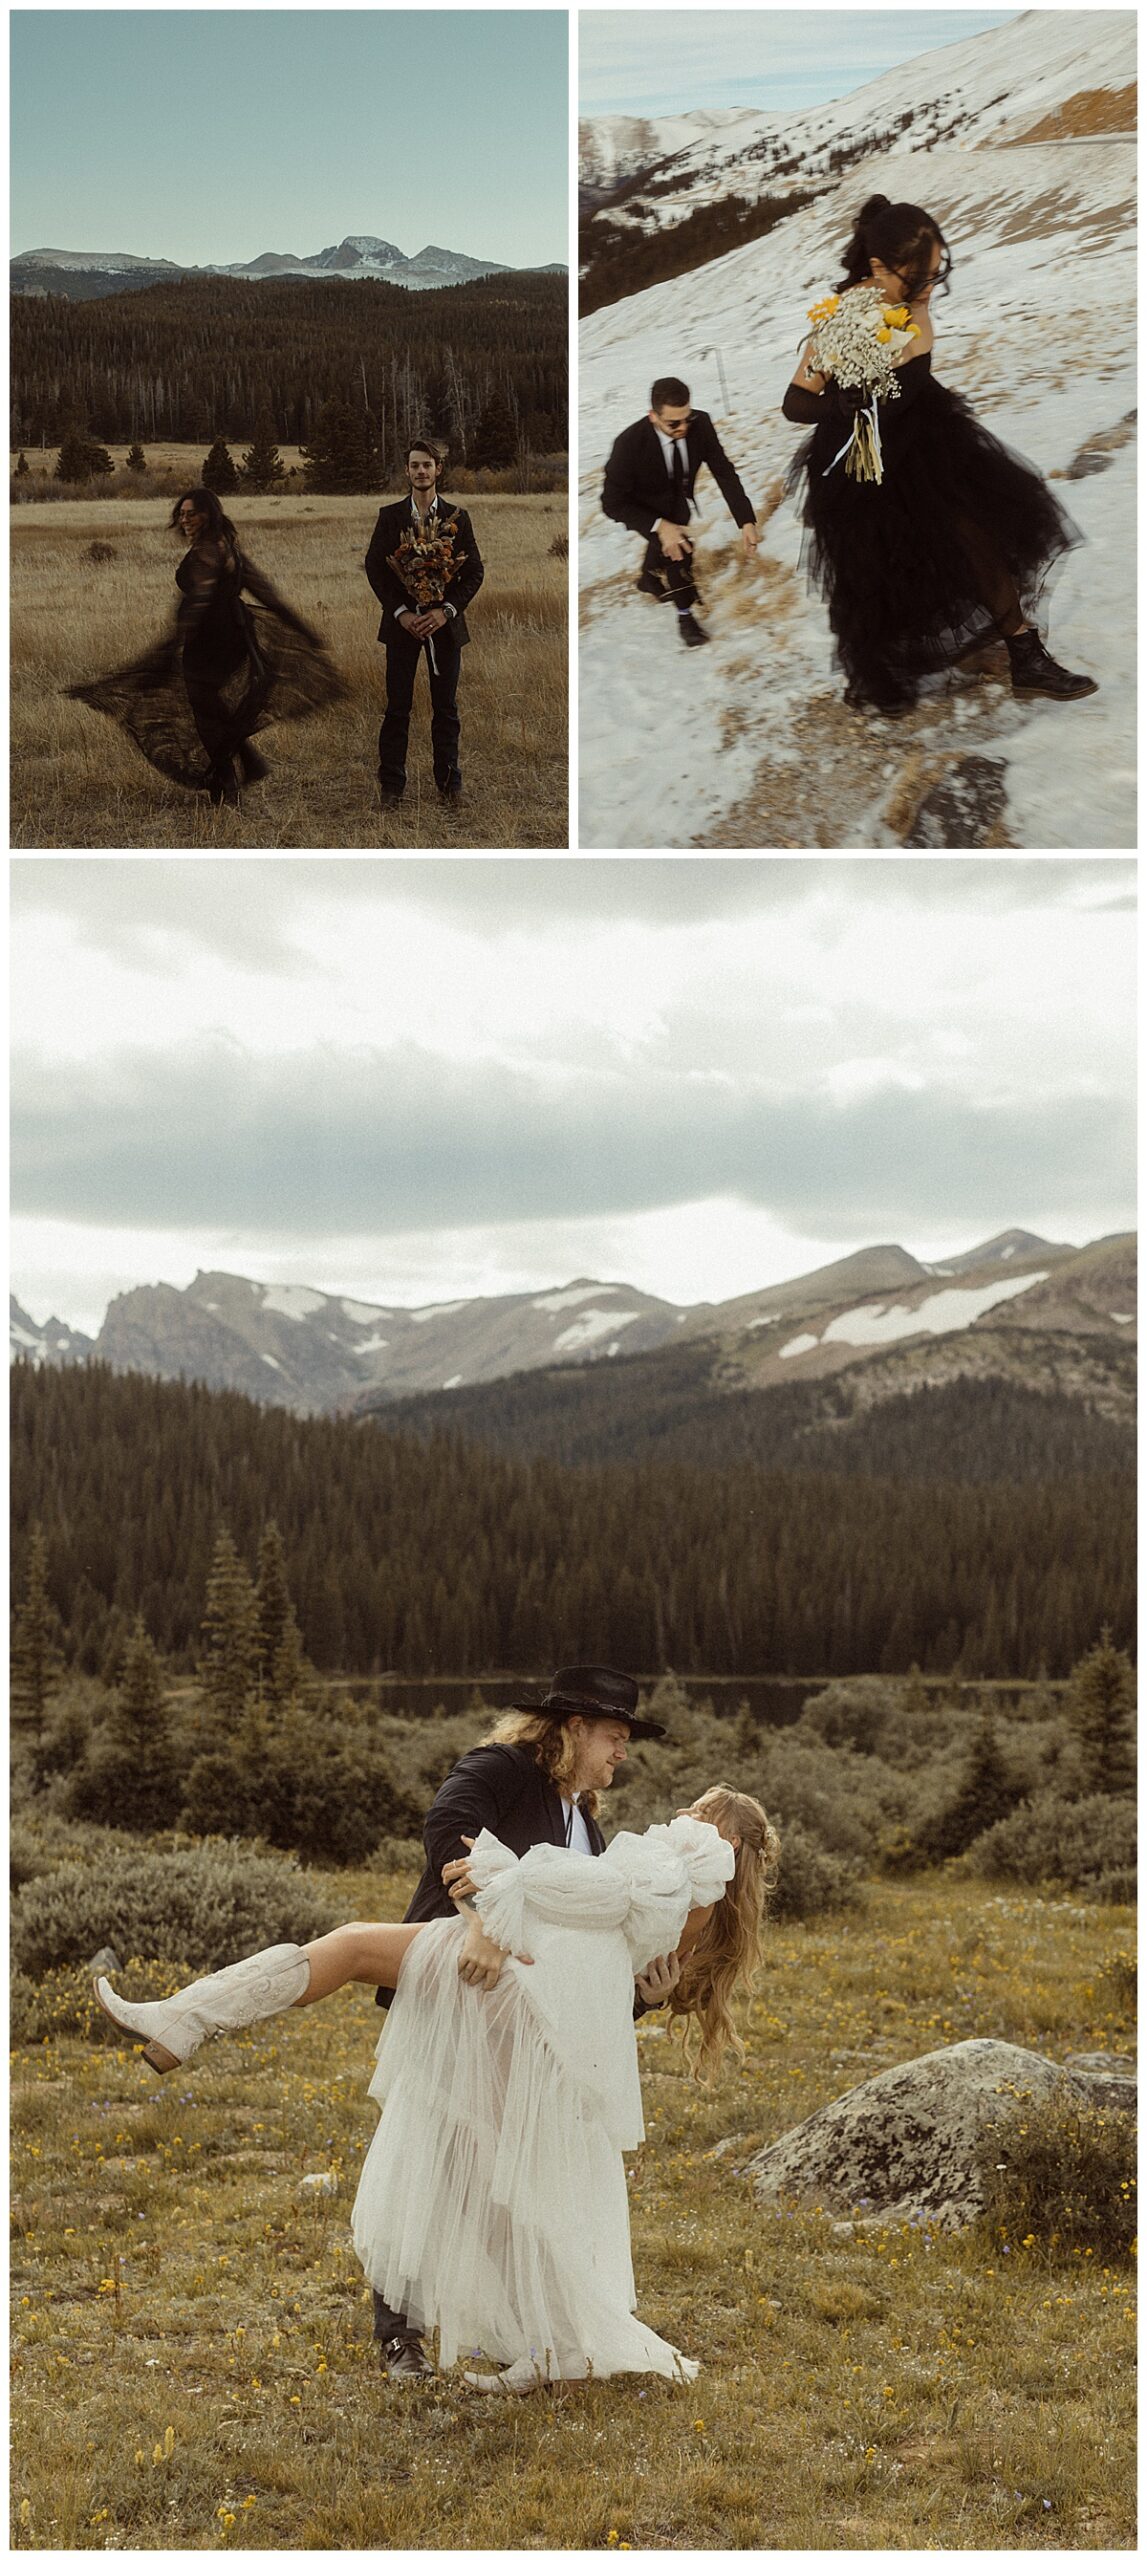 A special moment for your elopement can be sharing a first dance, like this couple in the mountains.